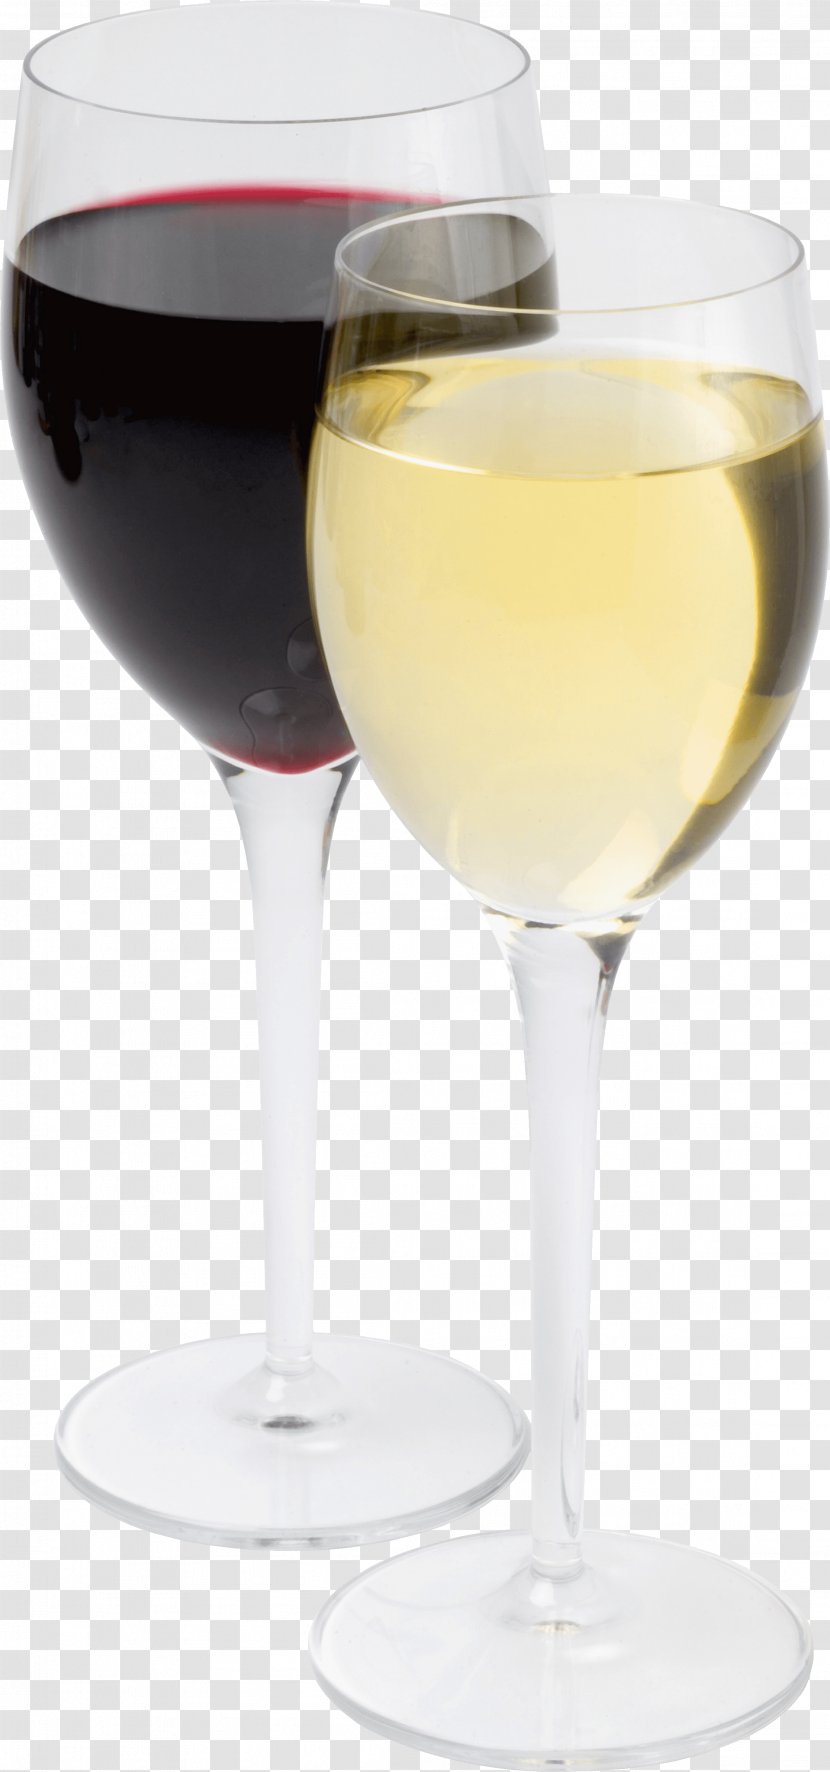 Wine Glass Champagne Drink Cup - Alcoholic Beverage - Image Transparent PNG